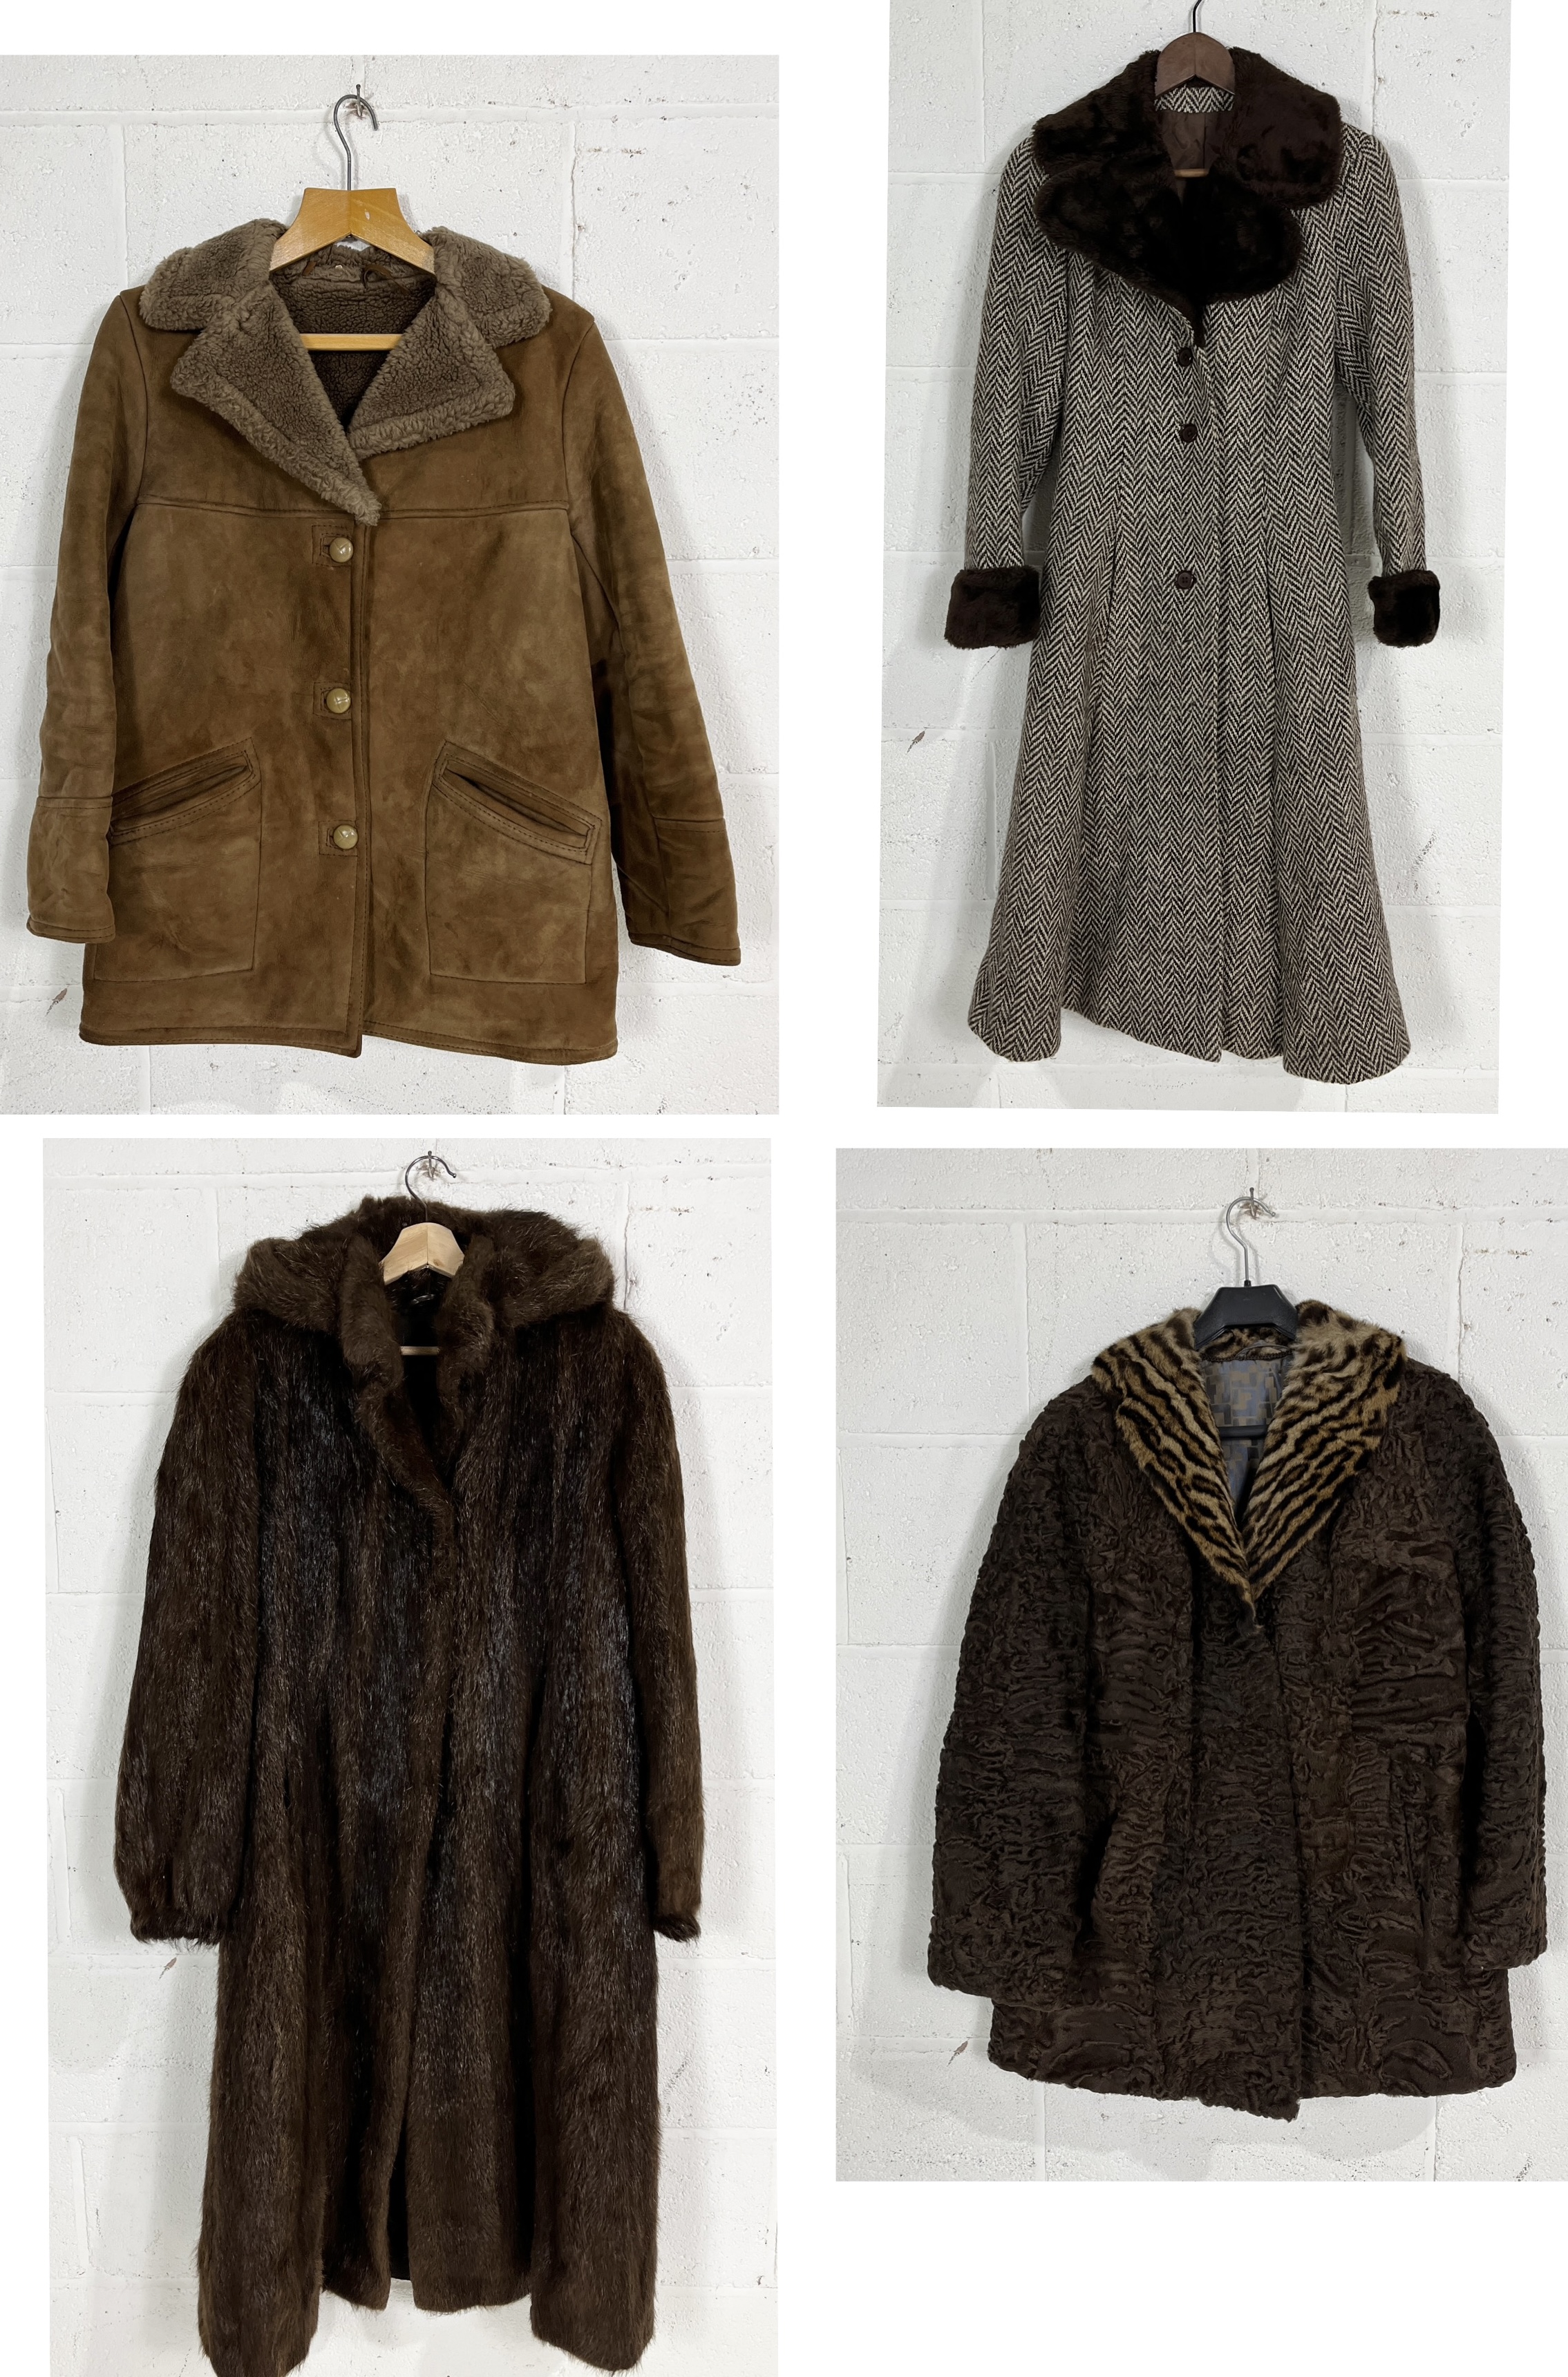 A collection of four vintage coats including long fur coat with hood made in Argentina, ladies fur